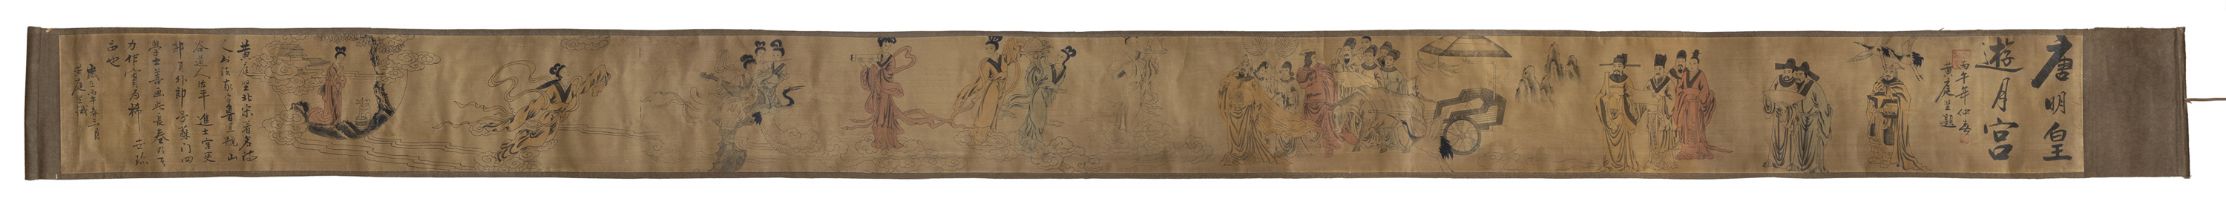 A MIXED MEDIA PAINTING ON SILK CHINA FIRST HALF 20TH CENTURY